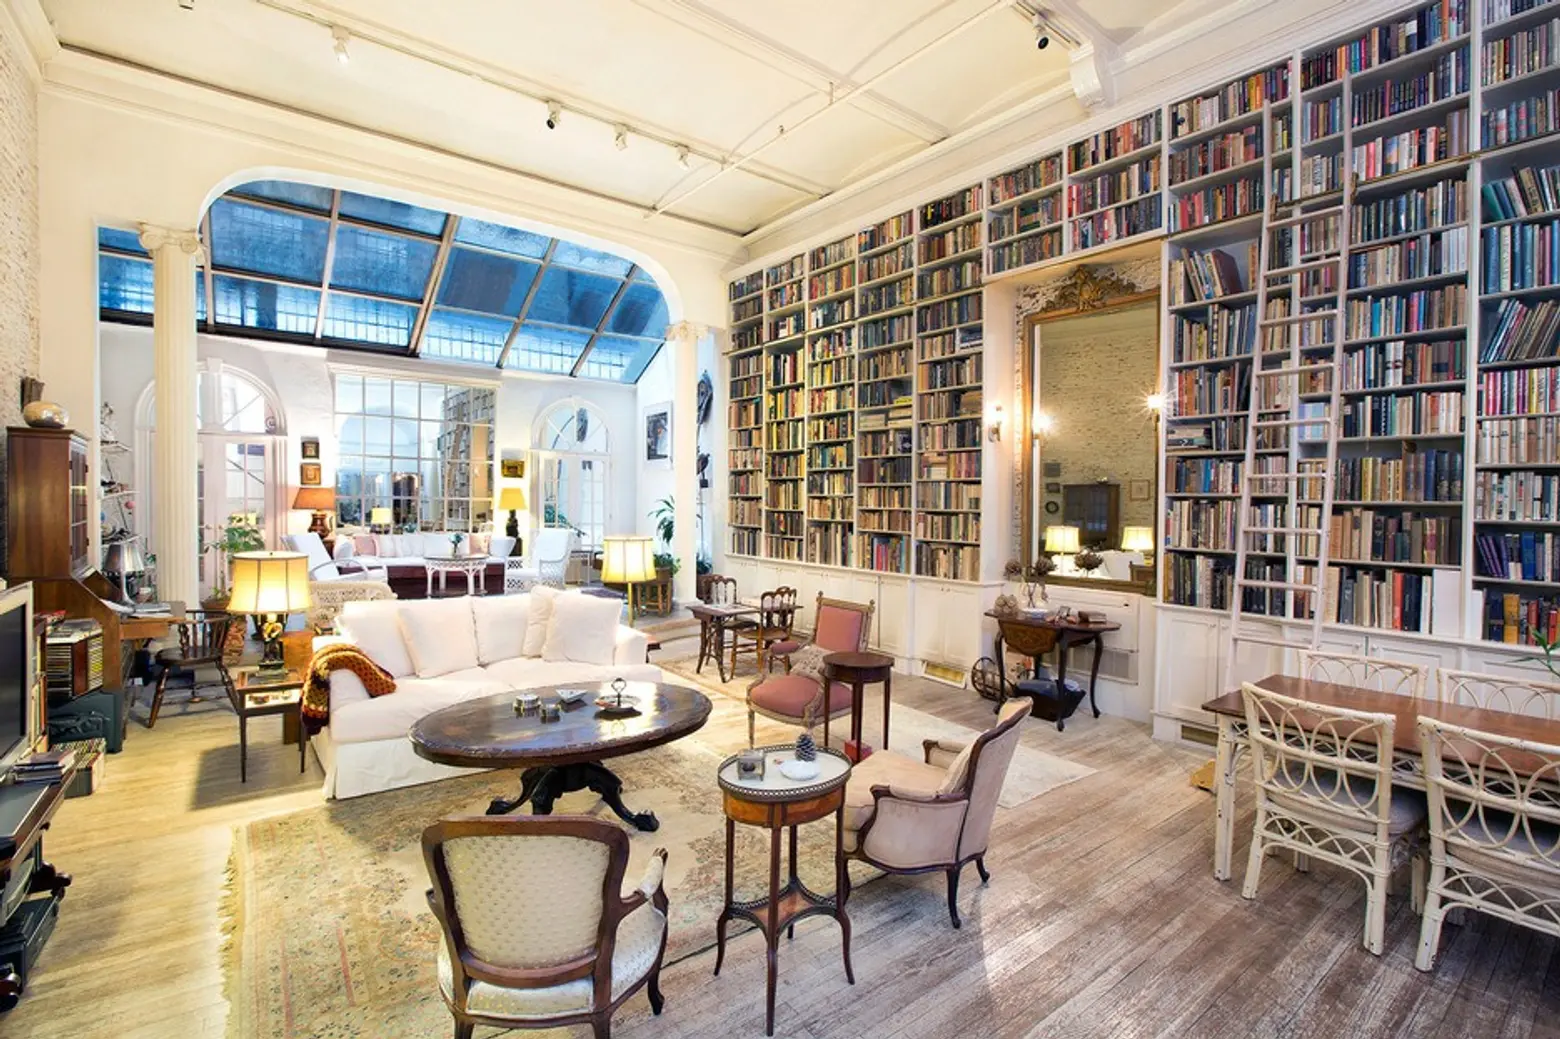 $2.7M Noho triplex stuns with library walls, glass ceilings, and gilded mirrors